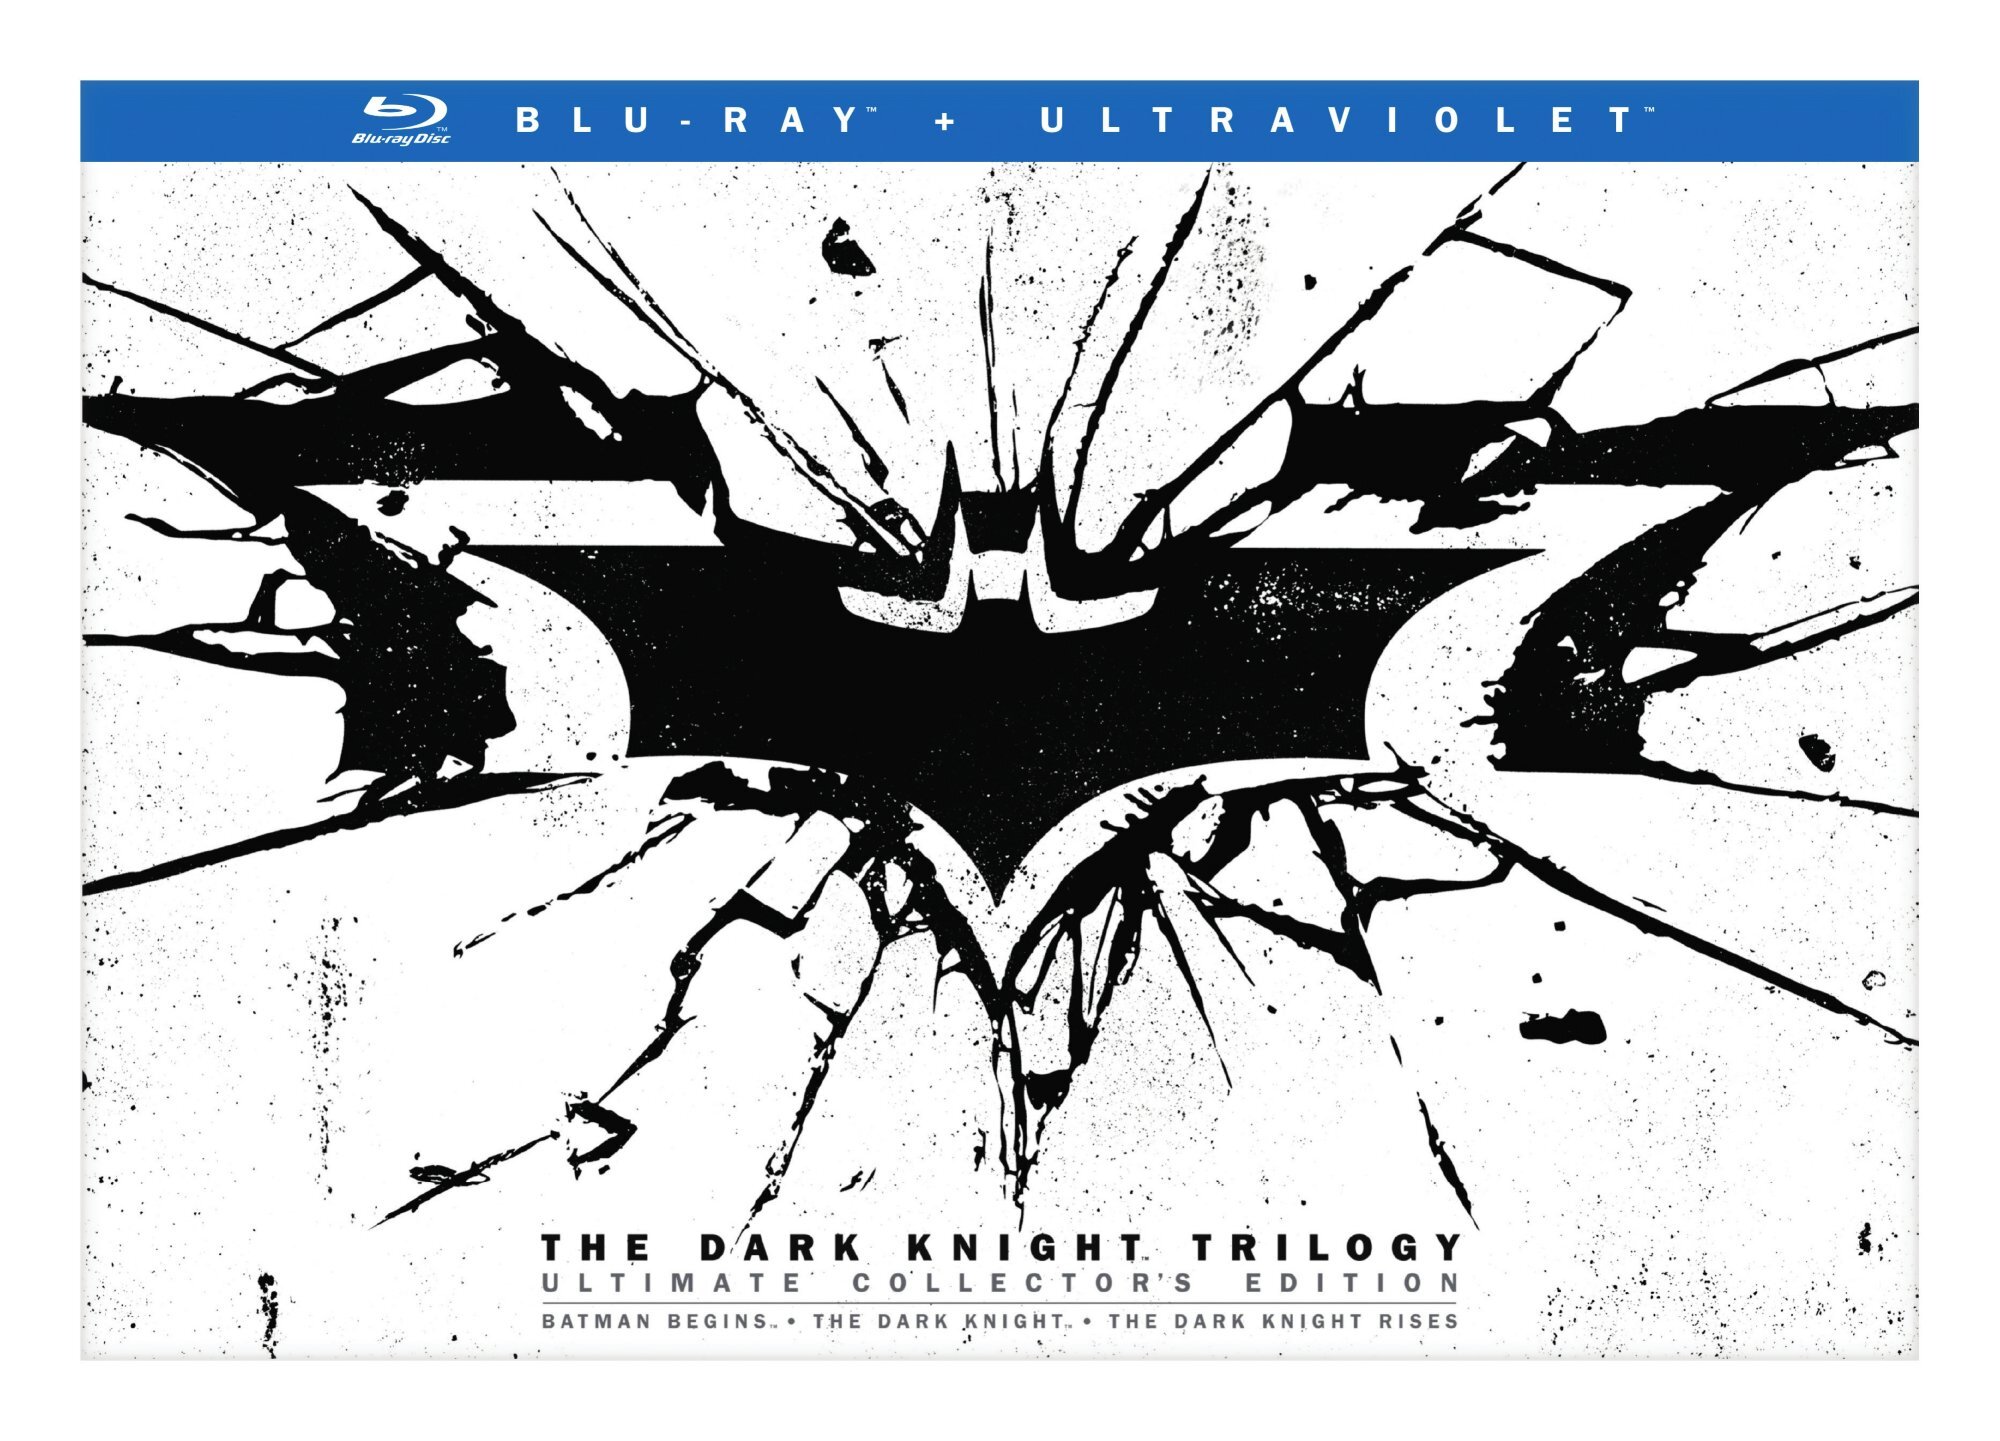 Buy The Dark Knight TrilogyBox Set with Digital HD UltraViolet Copy  (Collector's Edition) Blu-ray |